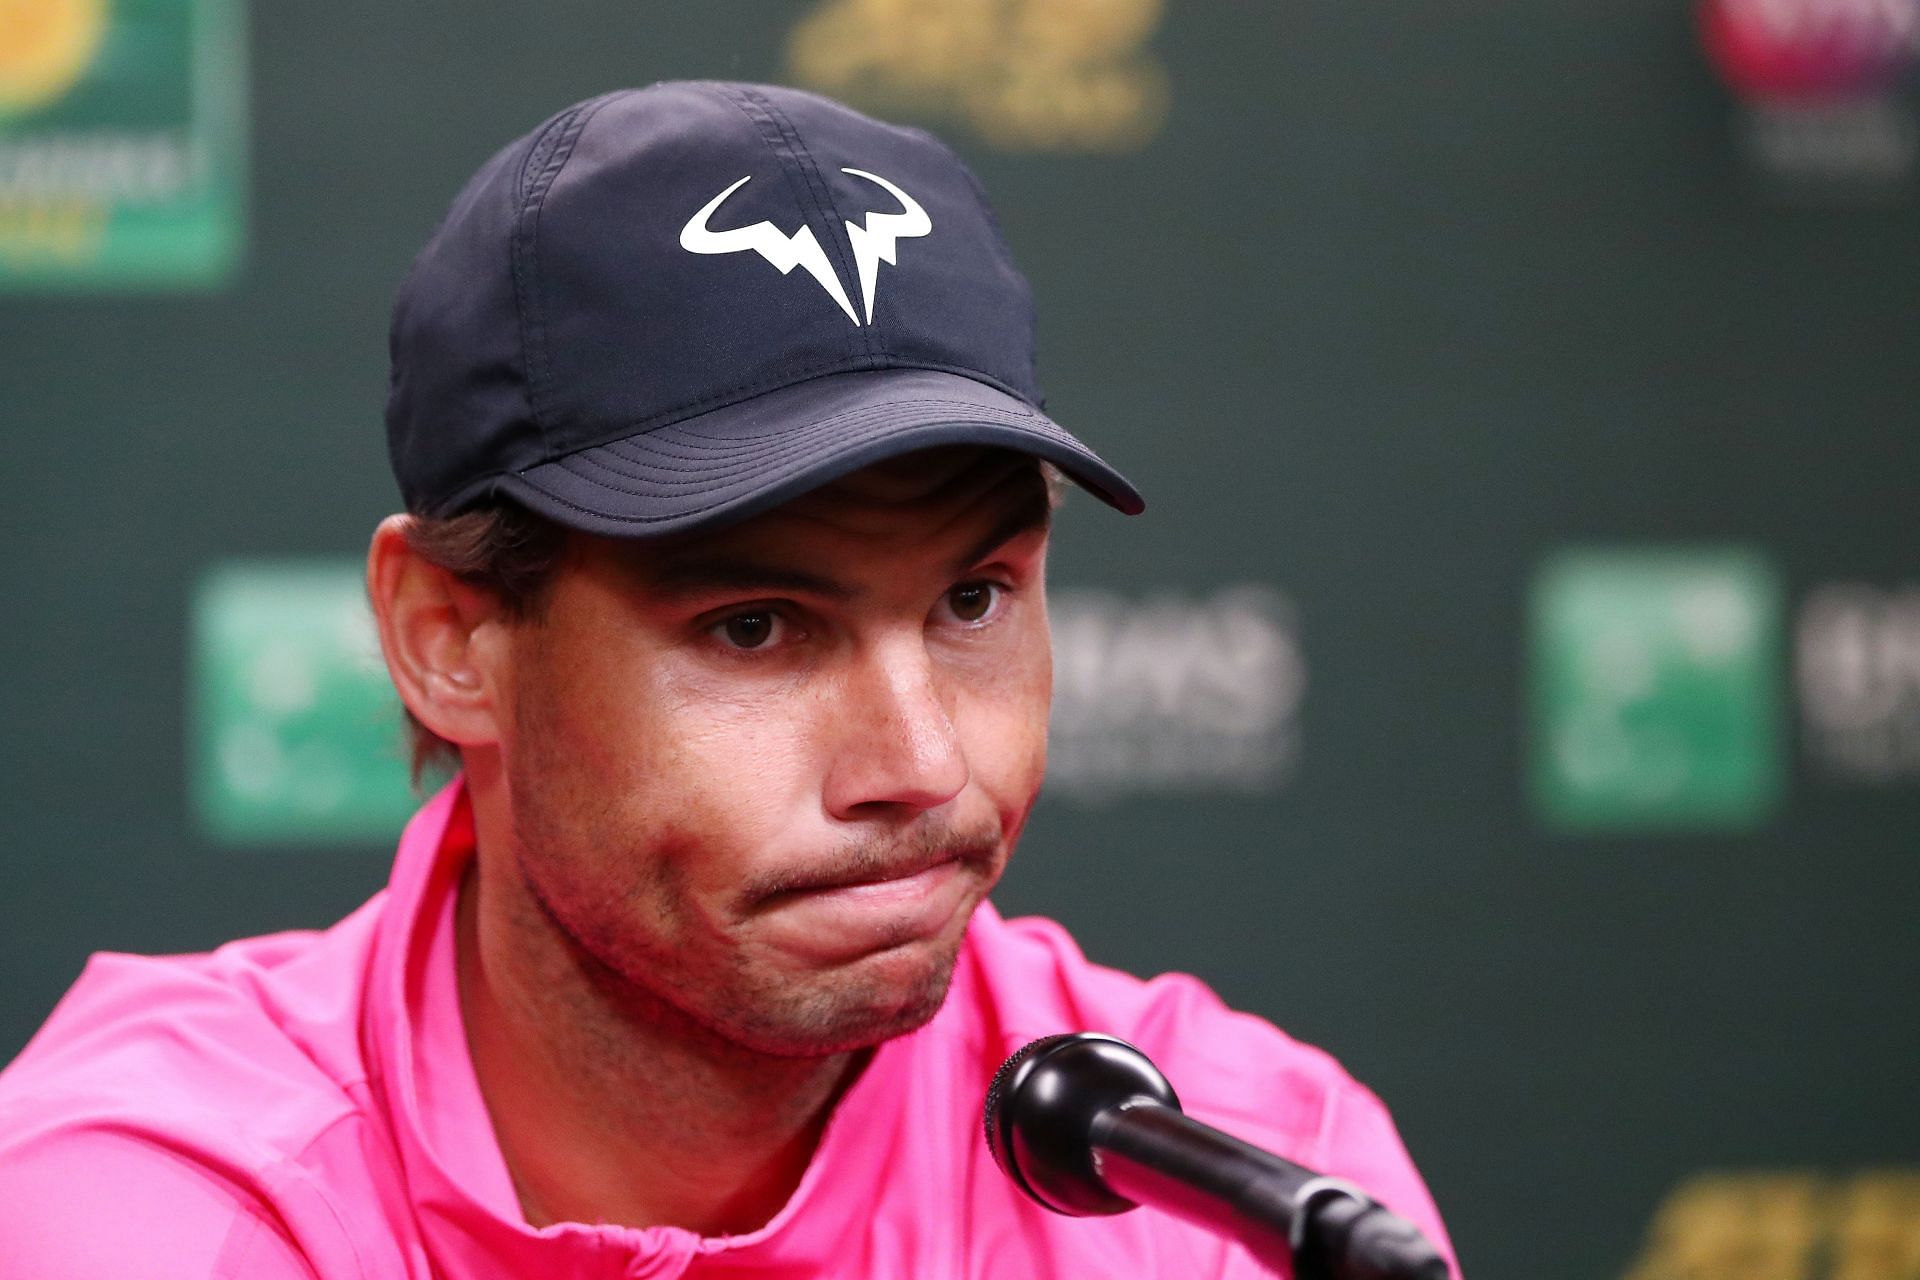 Rafael Nadal is recovering from an abdominal injury